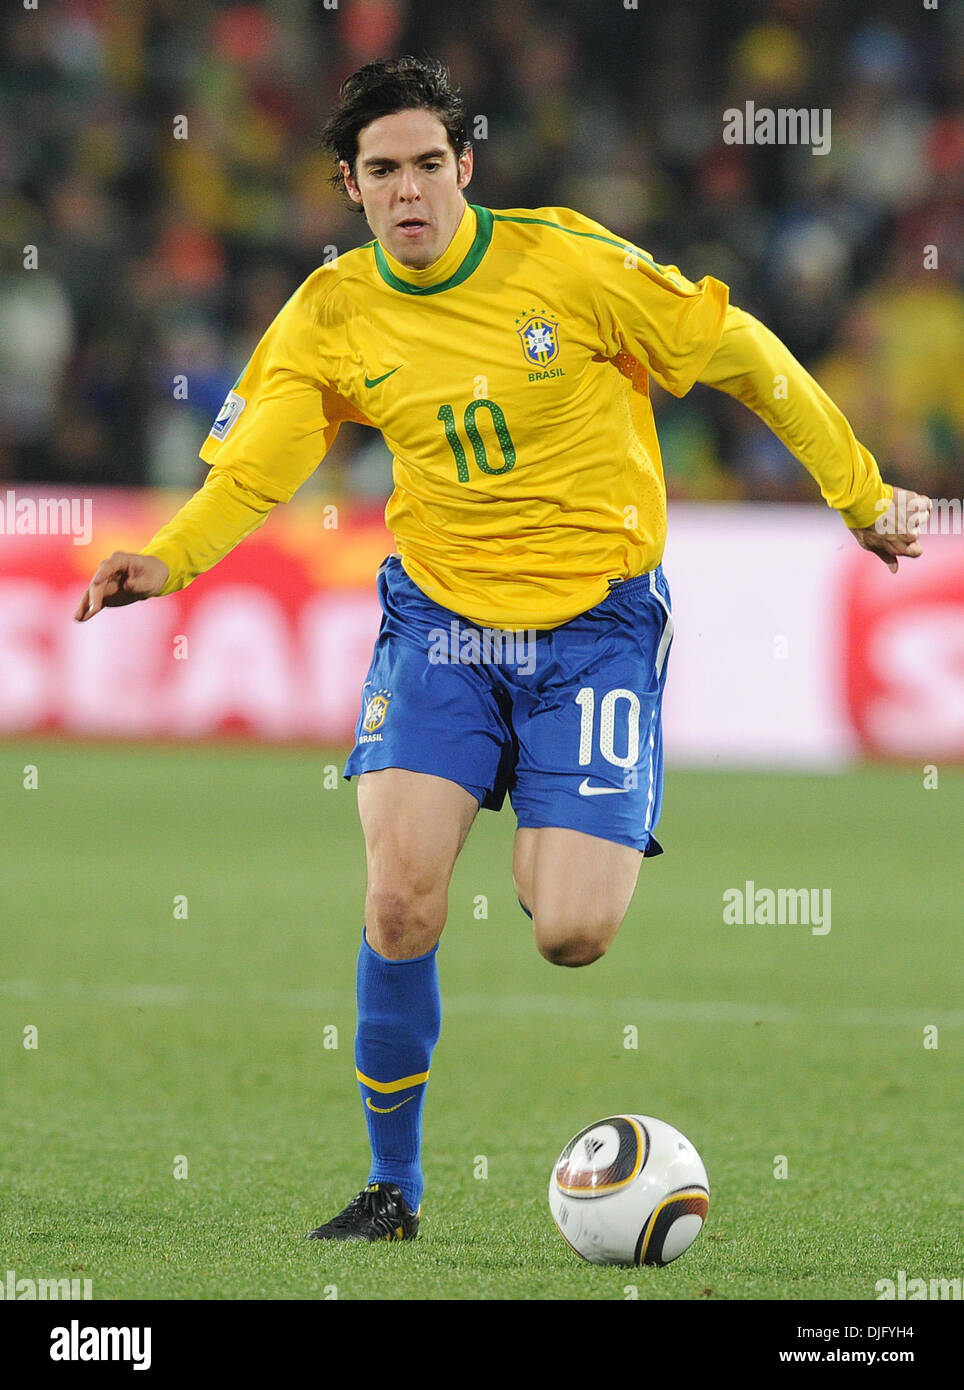 June 28, 2010 - Johannesburg, South Africa - Kaka of Brazil in action during the 2010 FIFA World Cup soccer match between Brazil and Chile at Ellis Park Stadium on June 28, 2010 in Johannesburg, South Africa. (Credit Image: © Luca Ghidoni/ZUMApress.com) Stock Photo